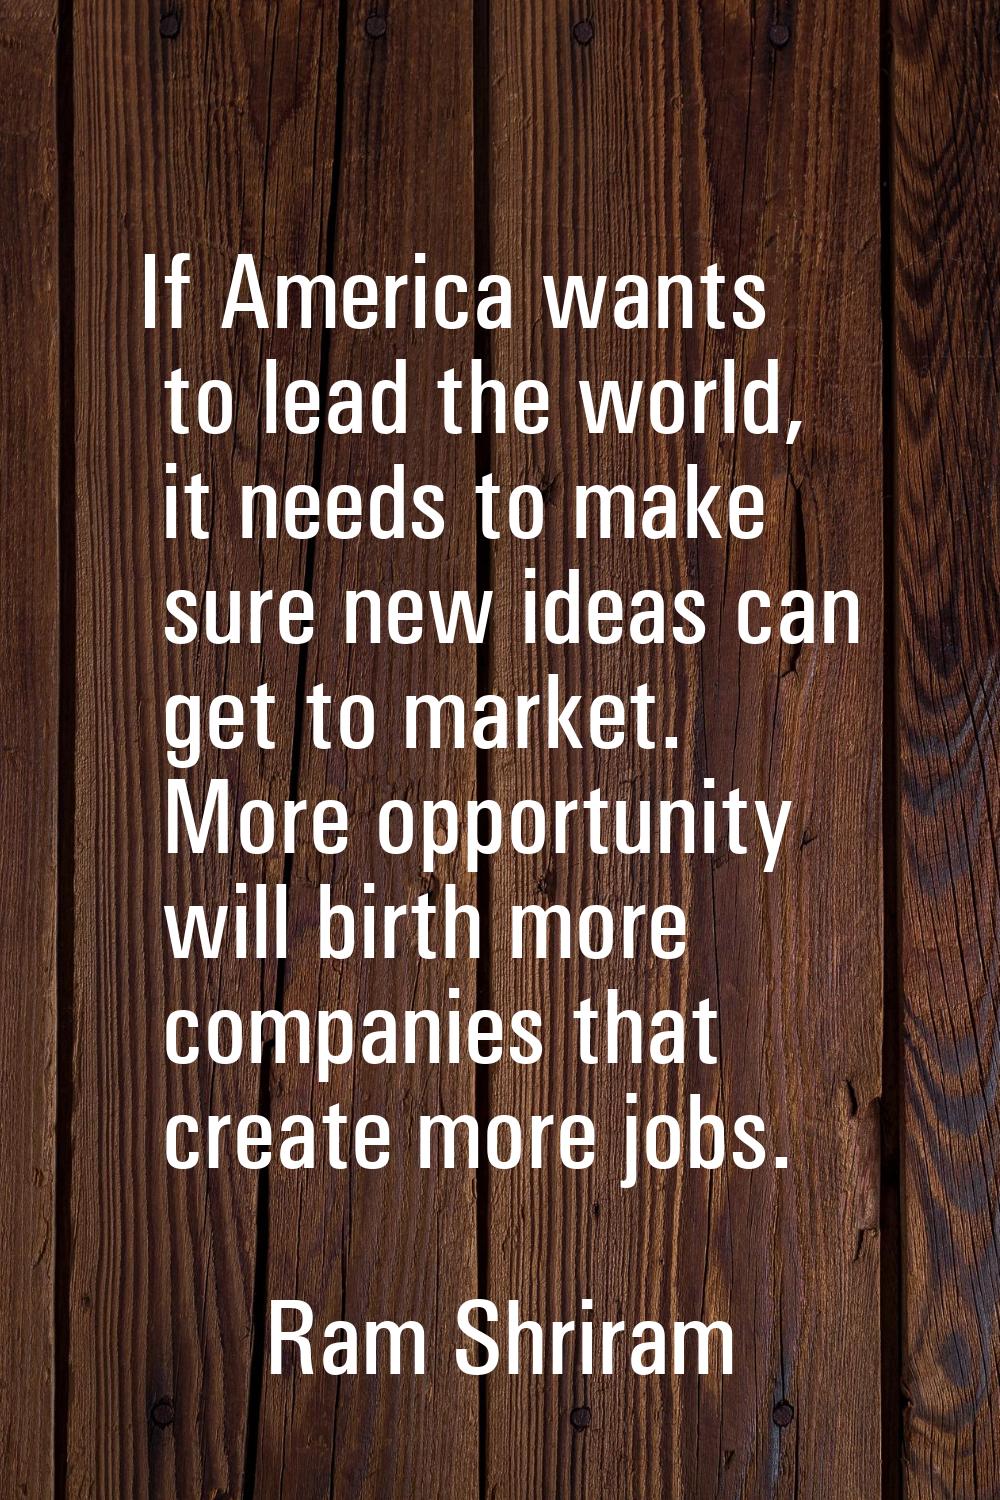 If America wants to lead the world, it needs to make sure new ideas can get to market. More opportu